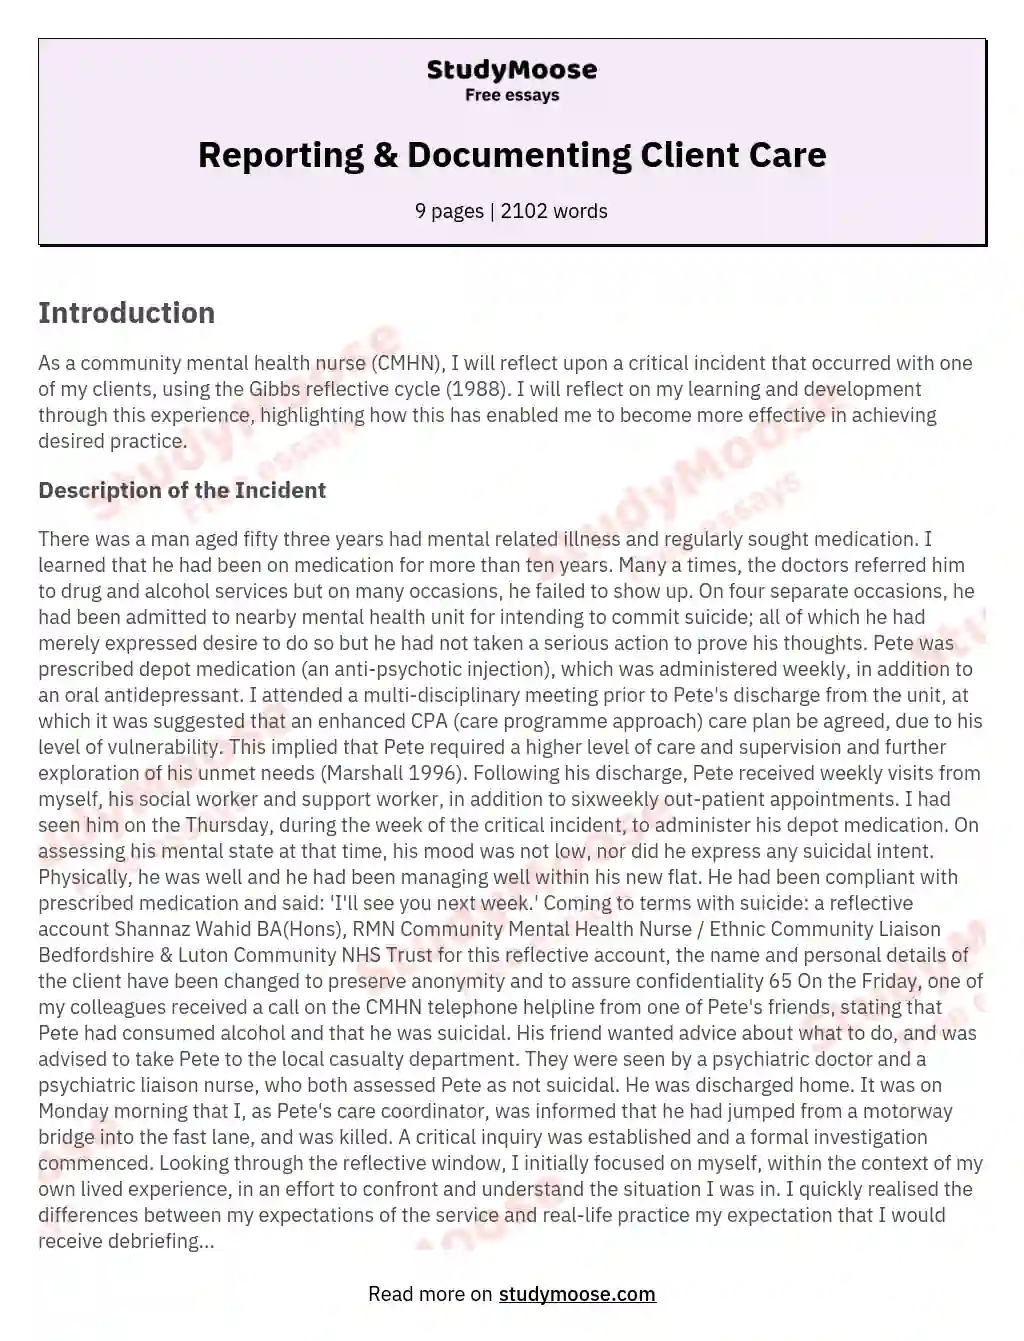 Reporting & Documenting Client Care essay